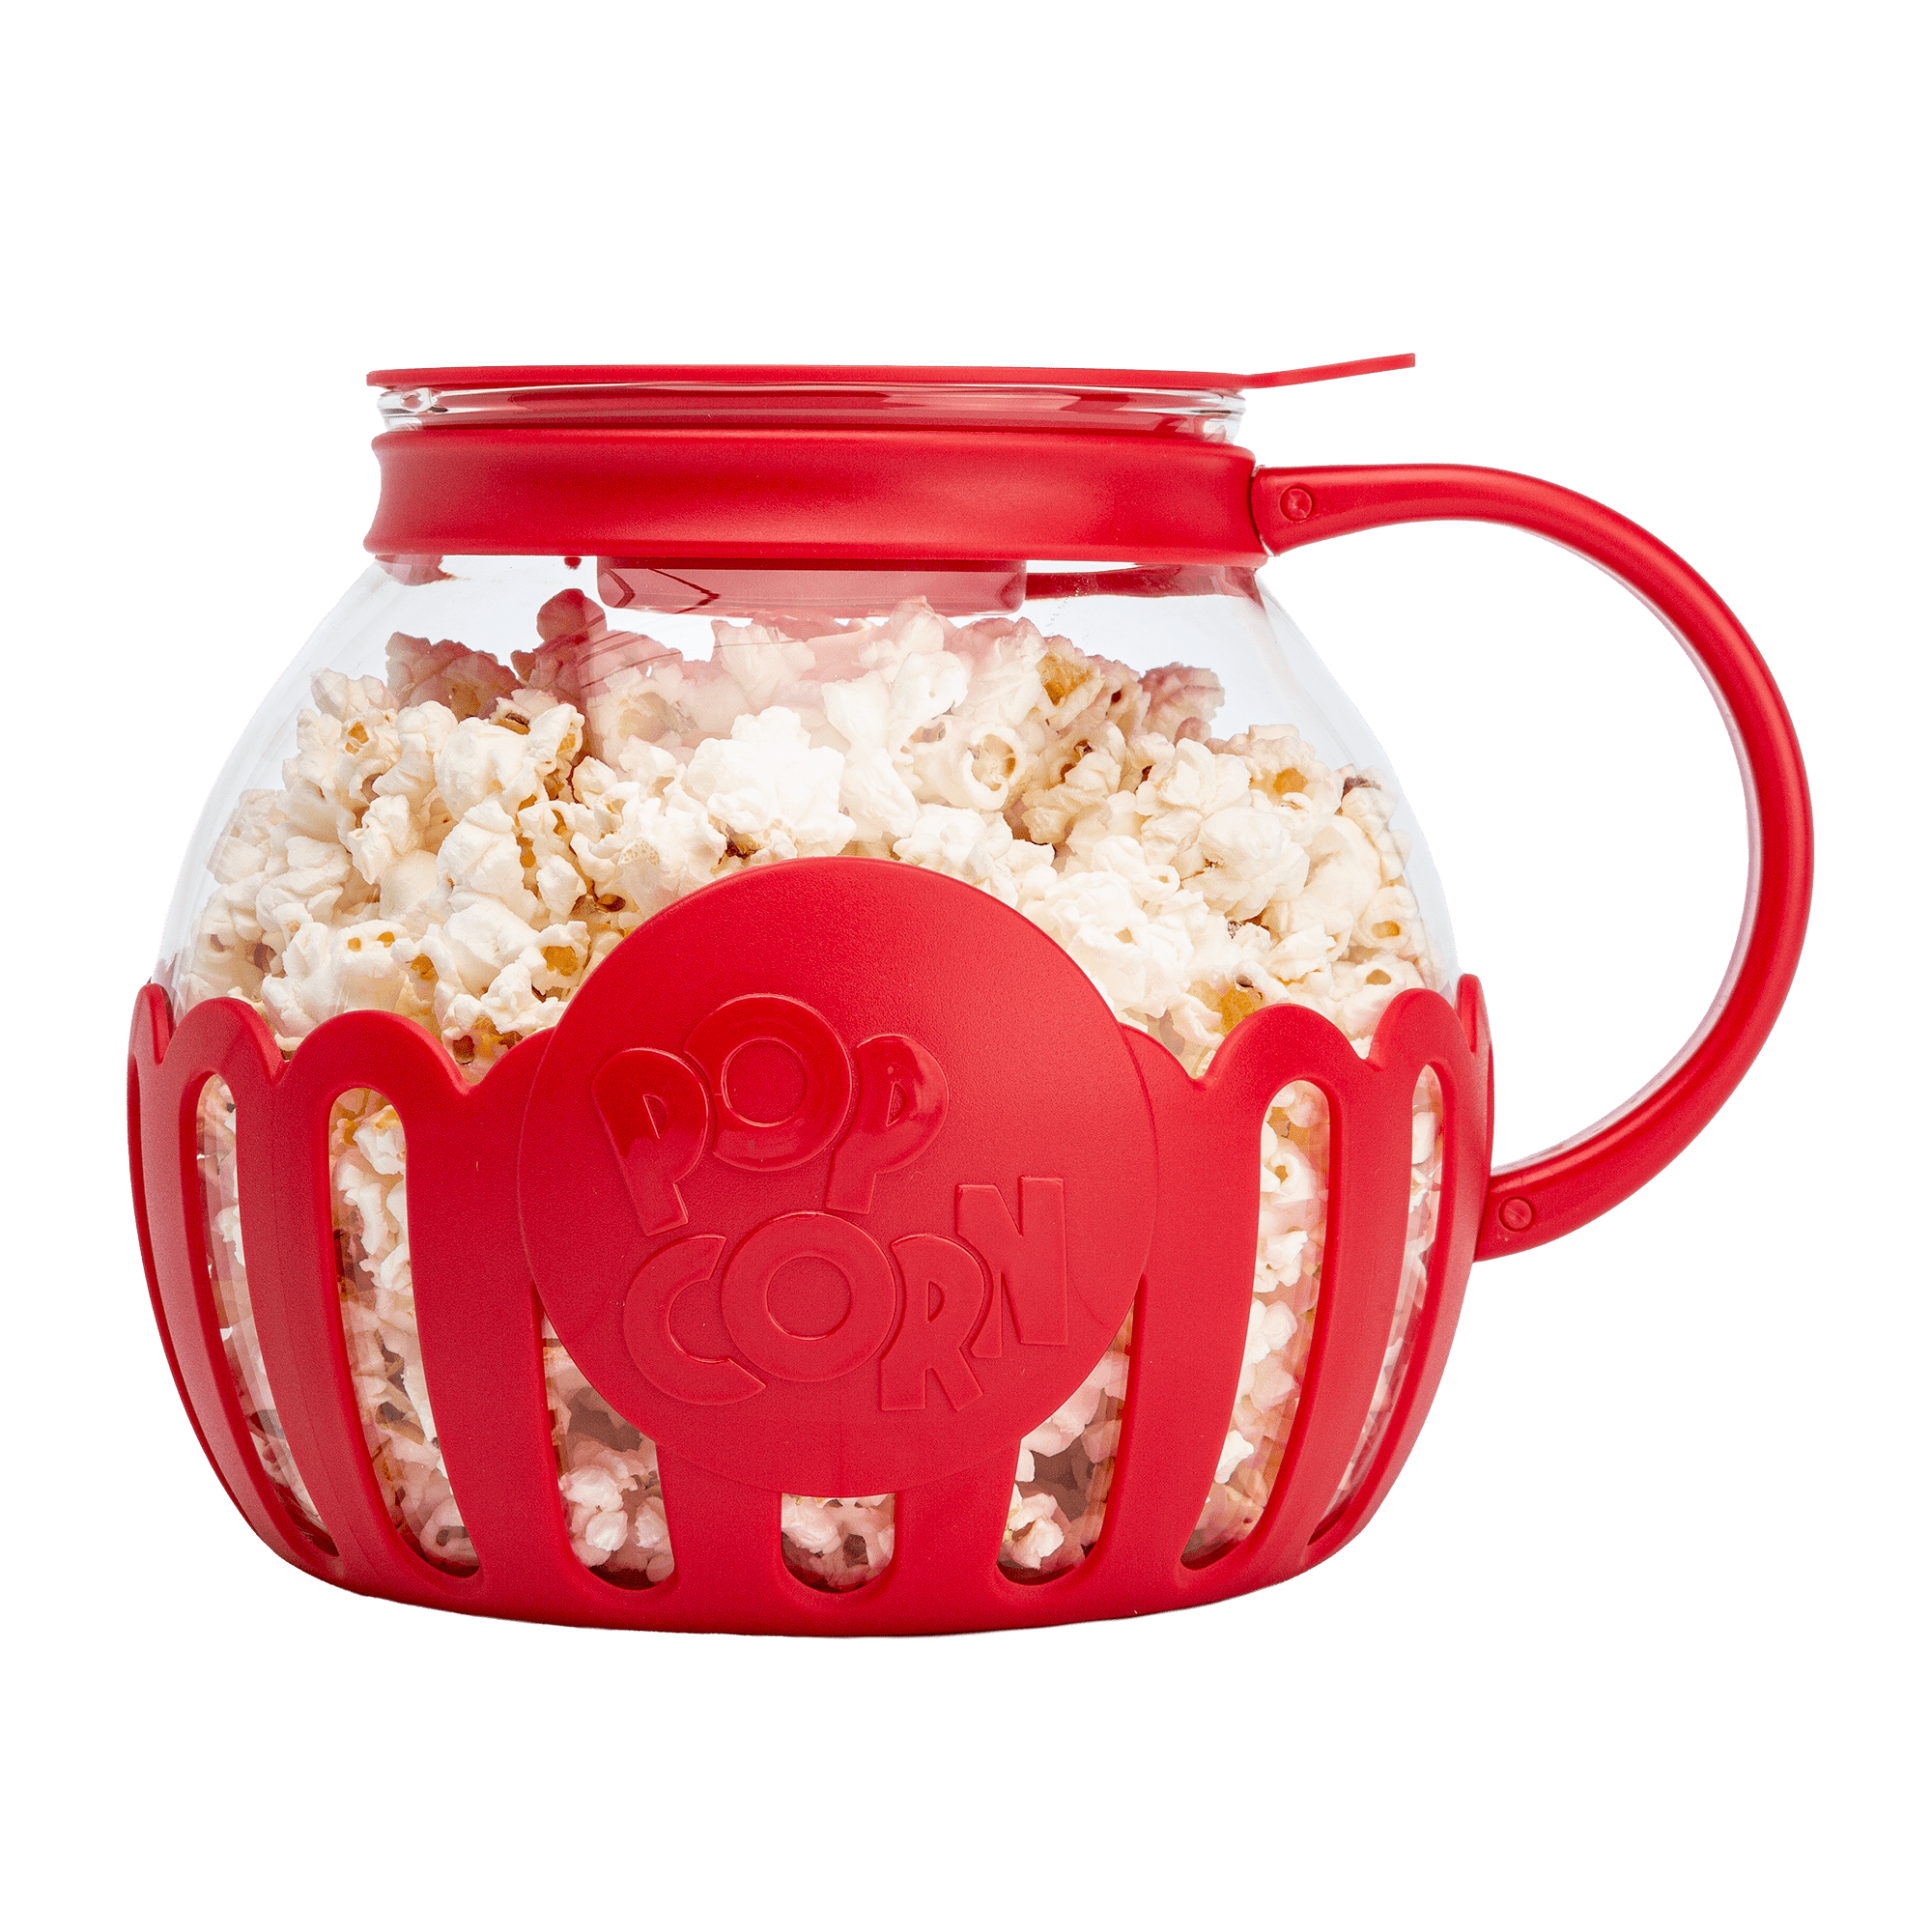 Ecolution Micro-Pop Popcorn Ball Maker Set, Create The Perfect Sized Treats, Made Without BPA, Mess-Free & Dishwasher Safe, 4-Piece Set, Multicolor